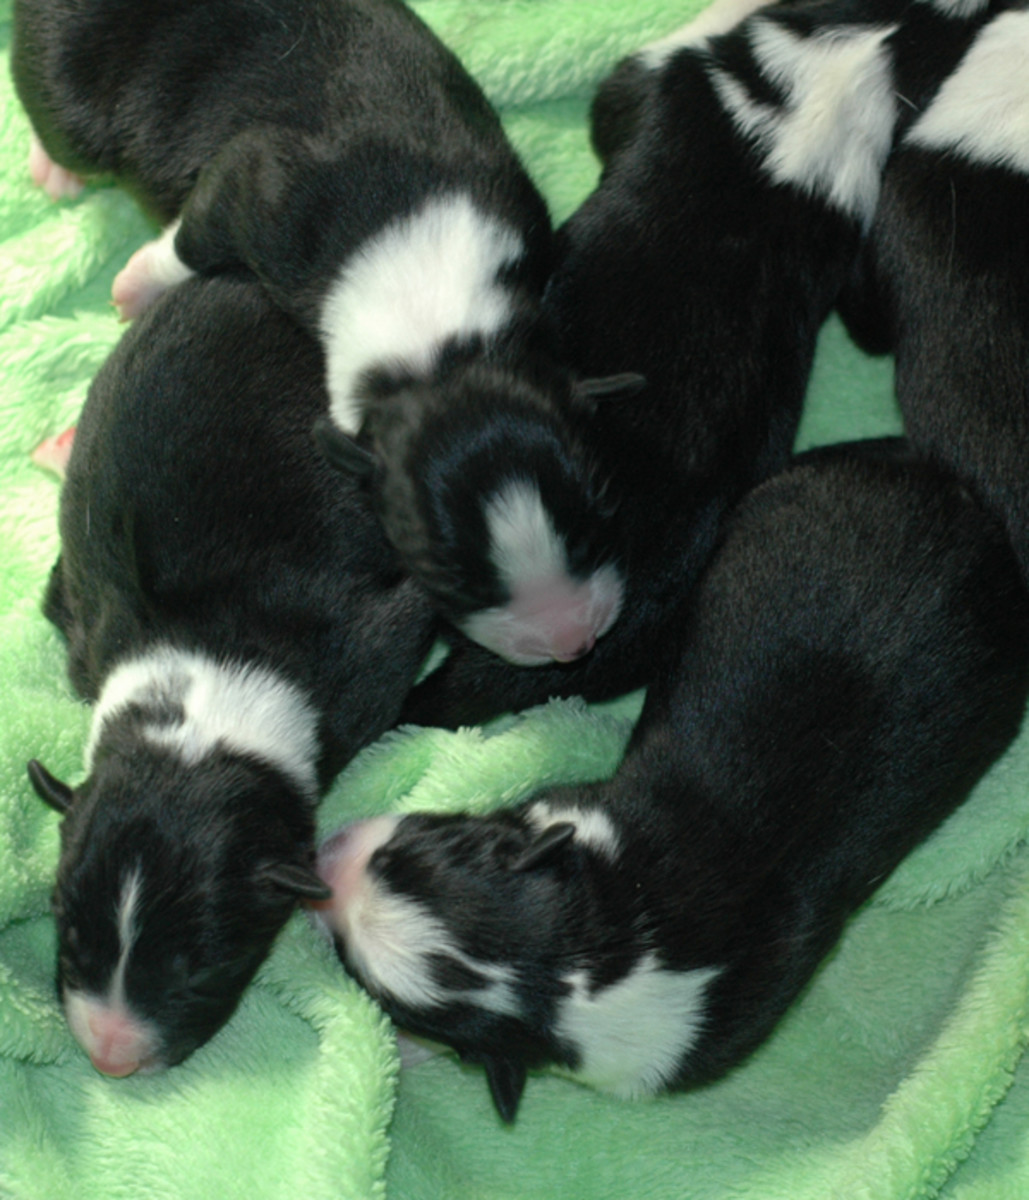 Clean Dry Puppies 3 hours after whelping.